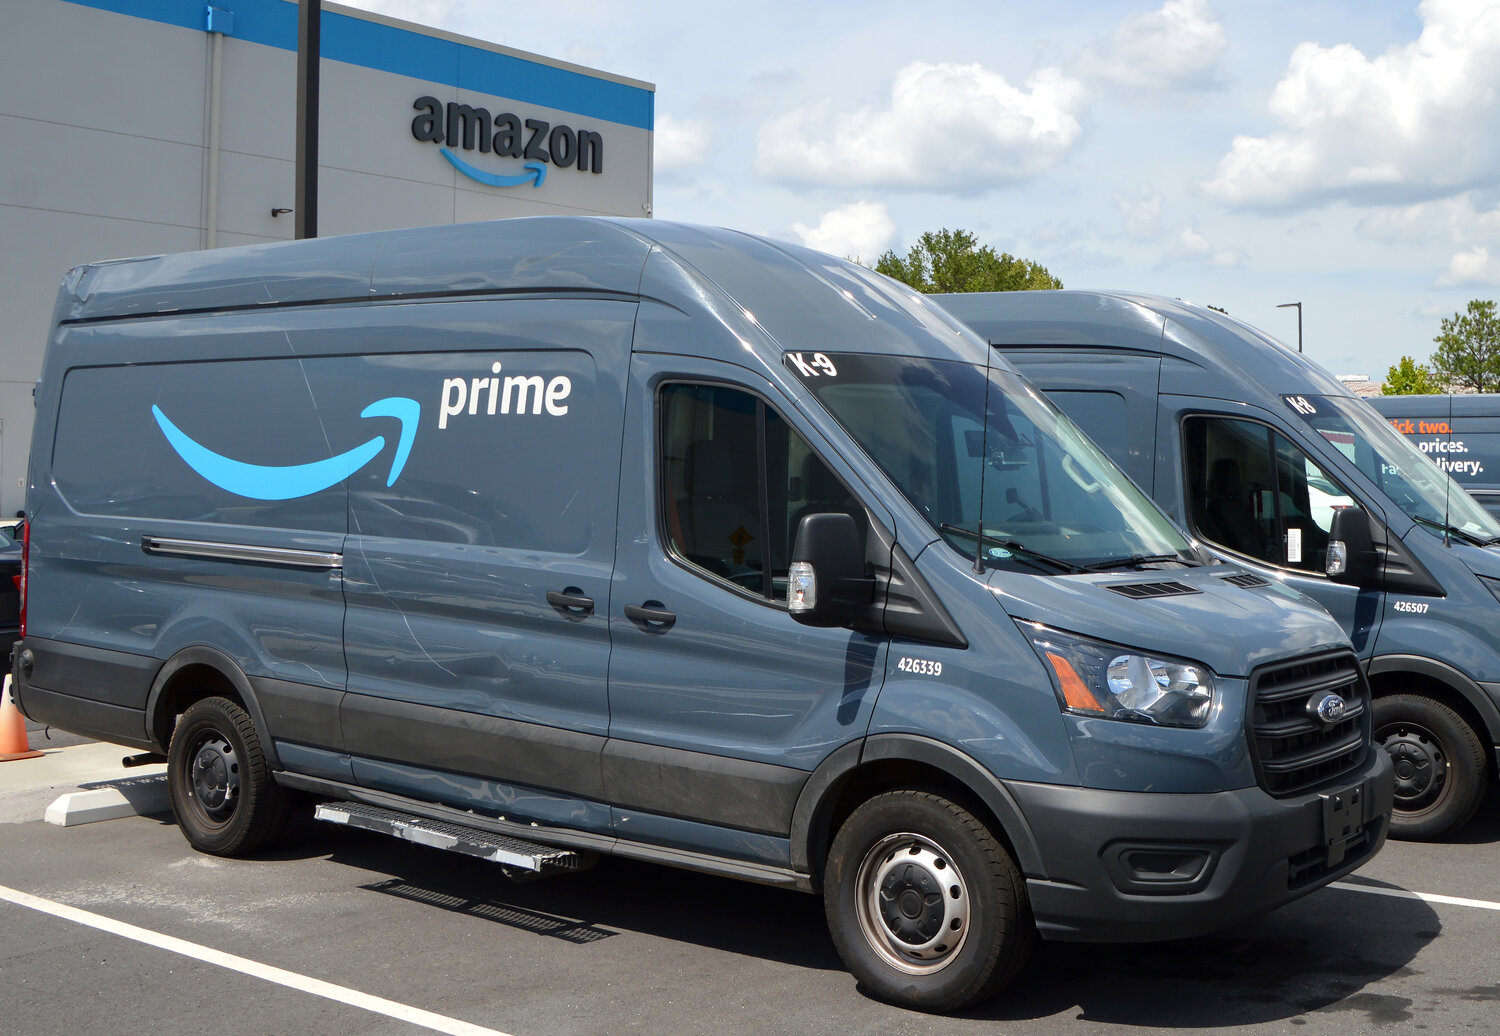 Amazon Prime delivery vehicles sit parked outside a distribution center in Doraville, Ga., July 27, 2022. (Index/Henry Durand, File)